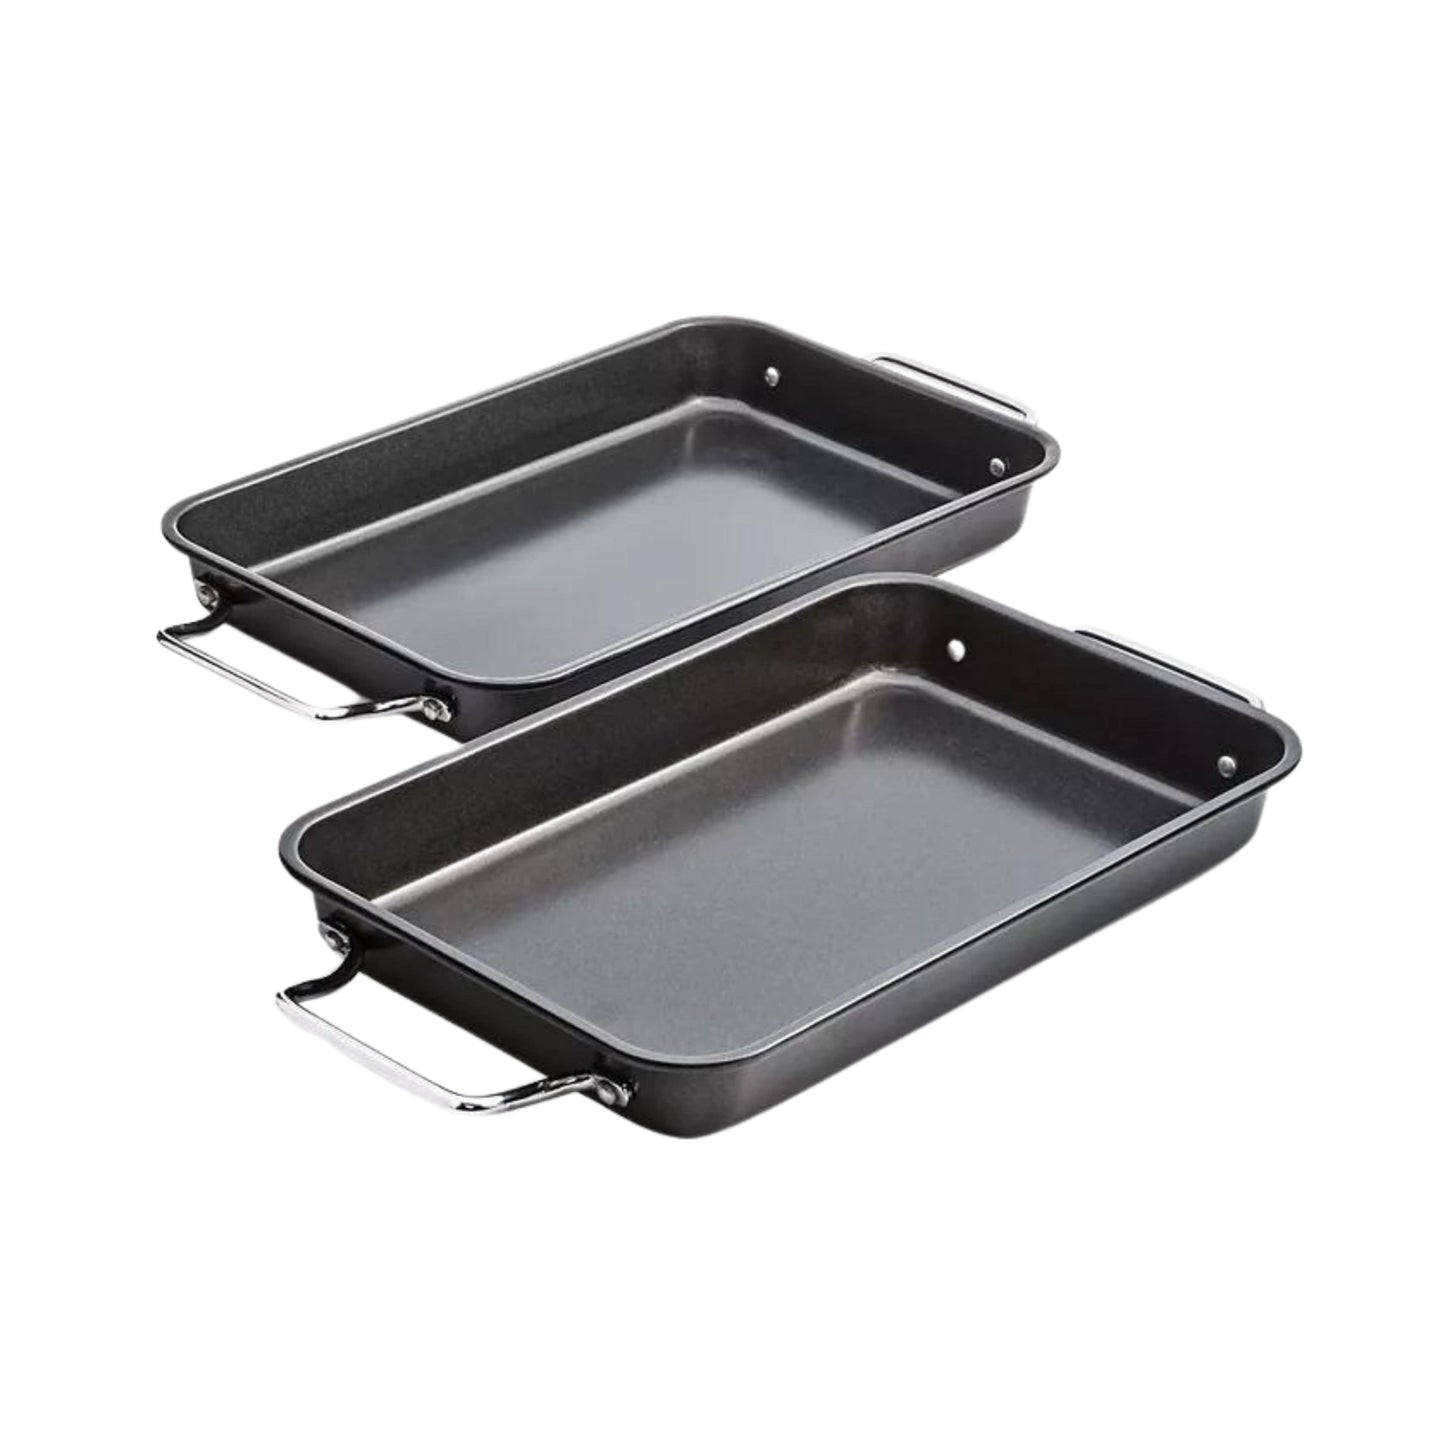 TOOLS OF THE TRADE Kitchenware Grey TOOLS OF THE TRADE - Small Roasting Pans Set of 2